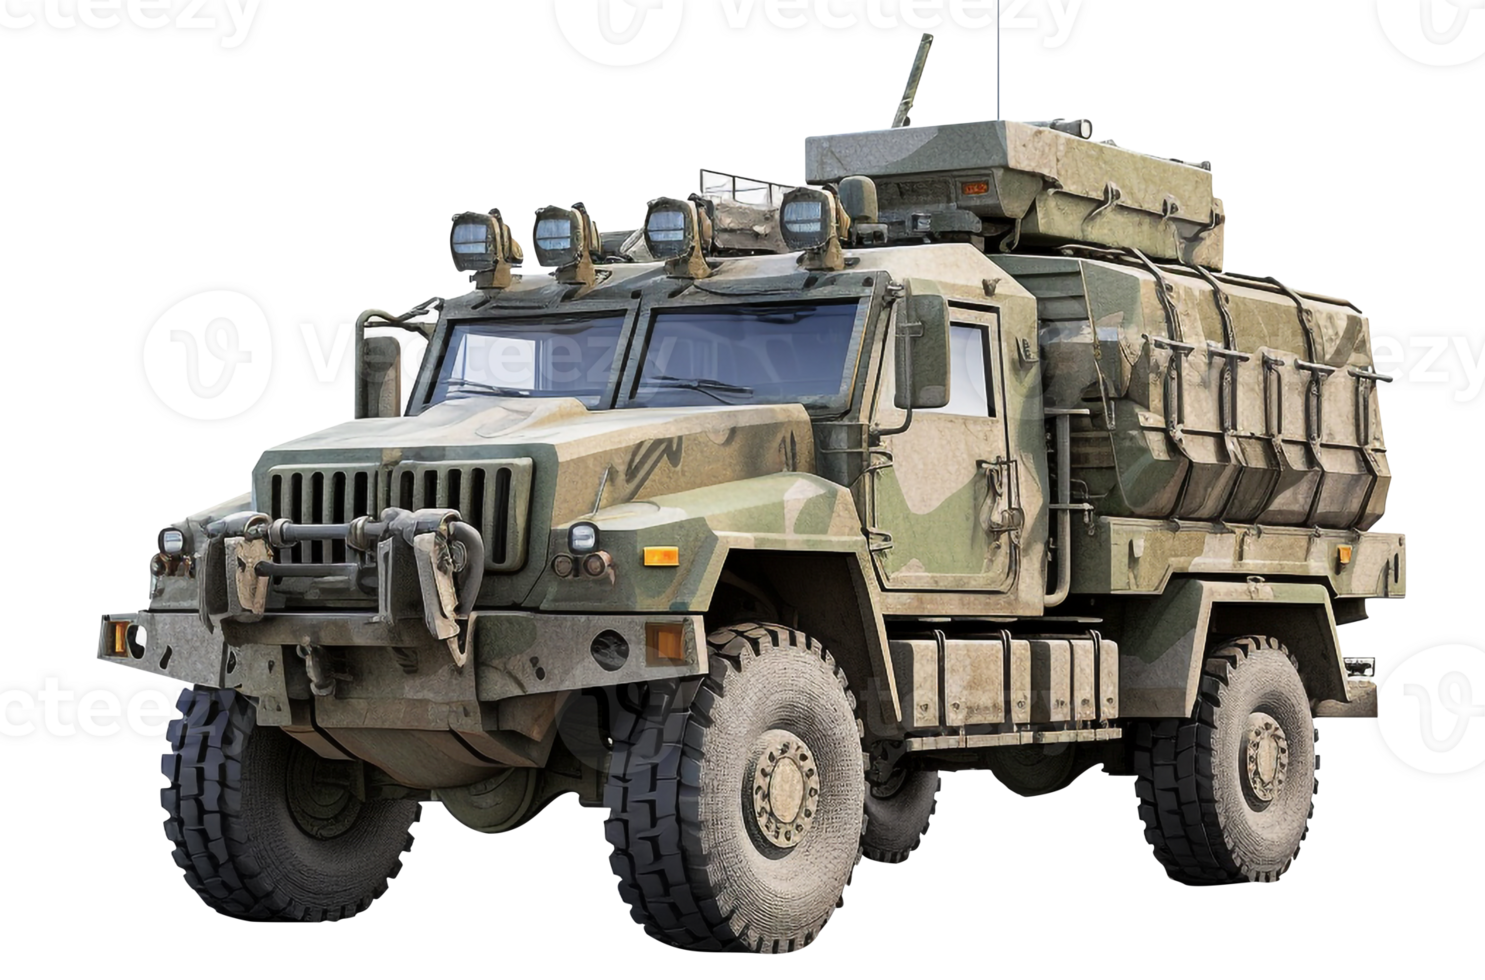 militare camion png esercito camion png blindato veicolo png blindato camion png militare blindato veicolo png militare blindato camion png militare camion png esercito camion trasparente sfondo ai generato